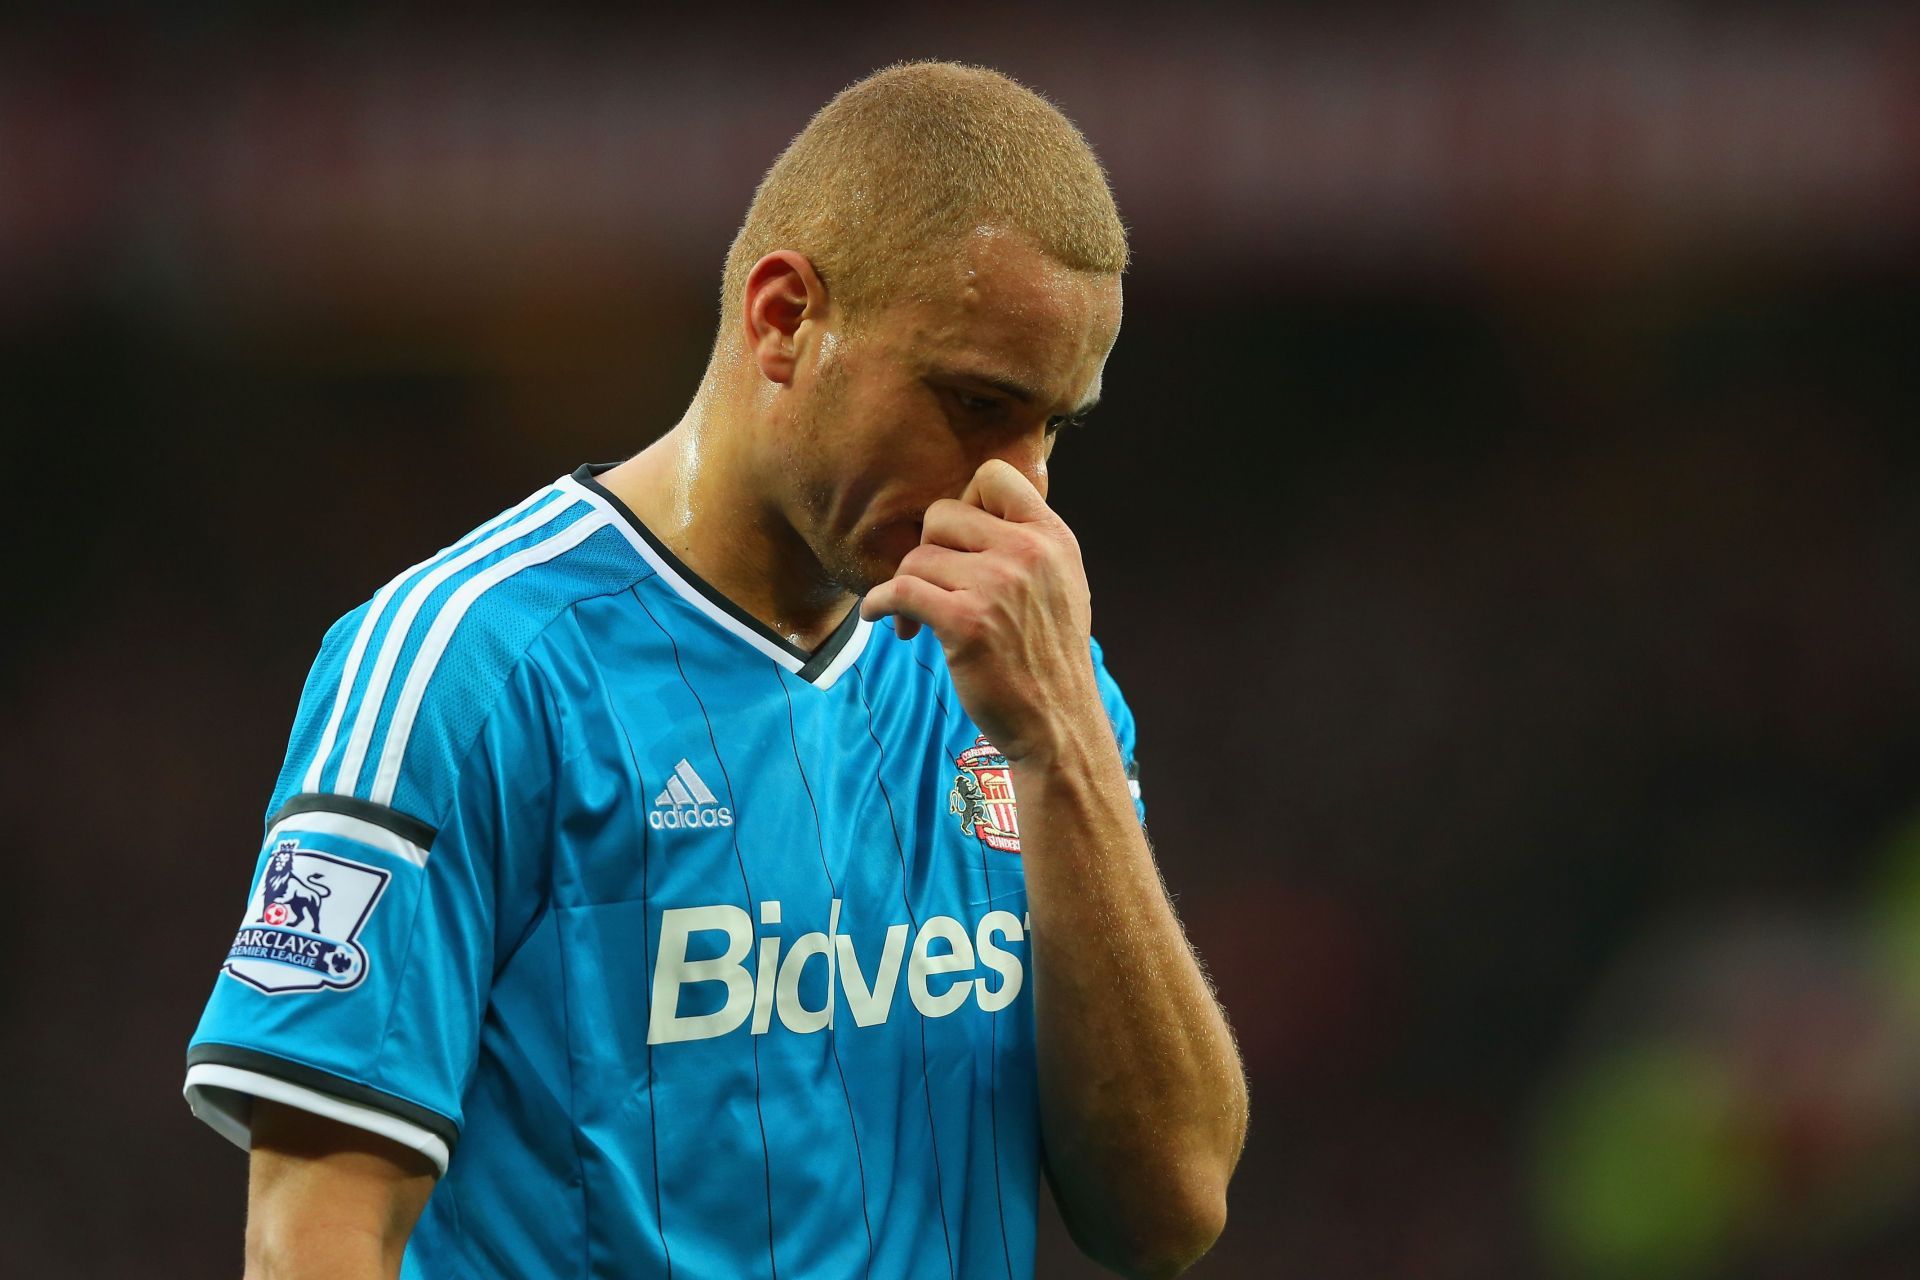 Wes Brown playing for Sunderland